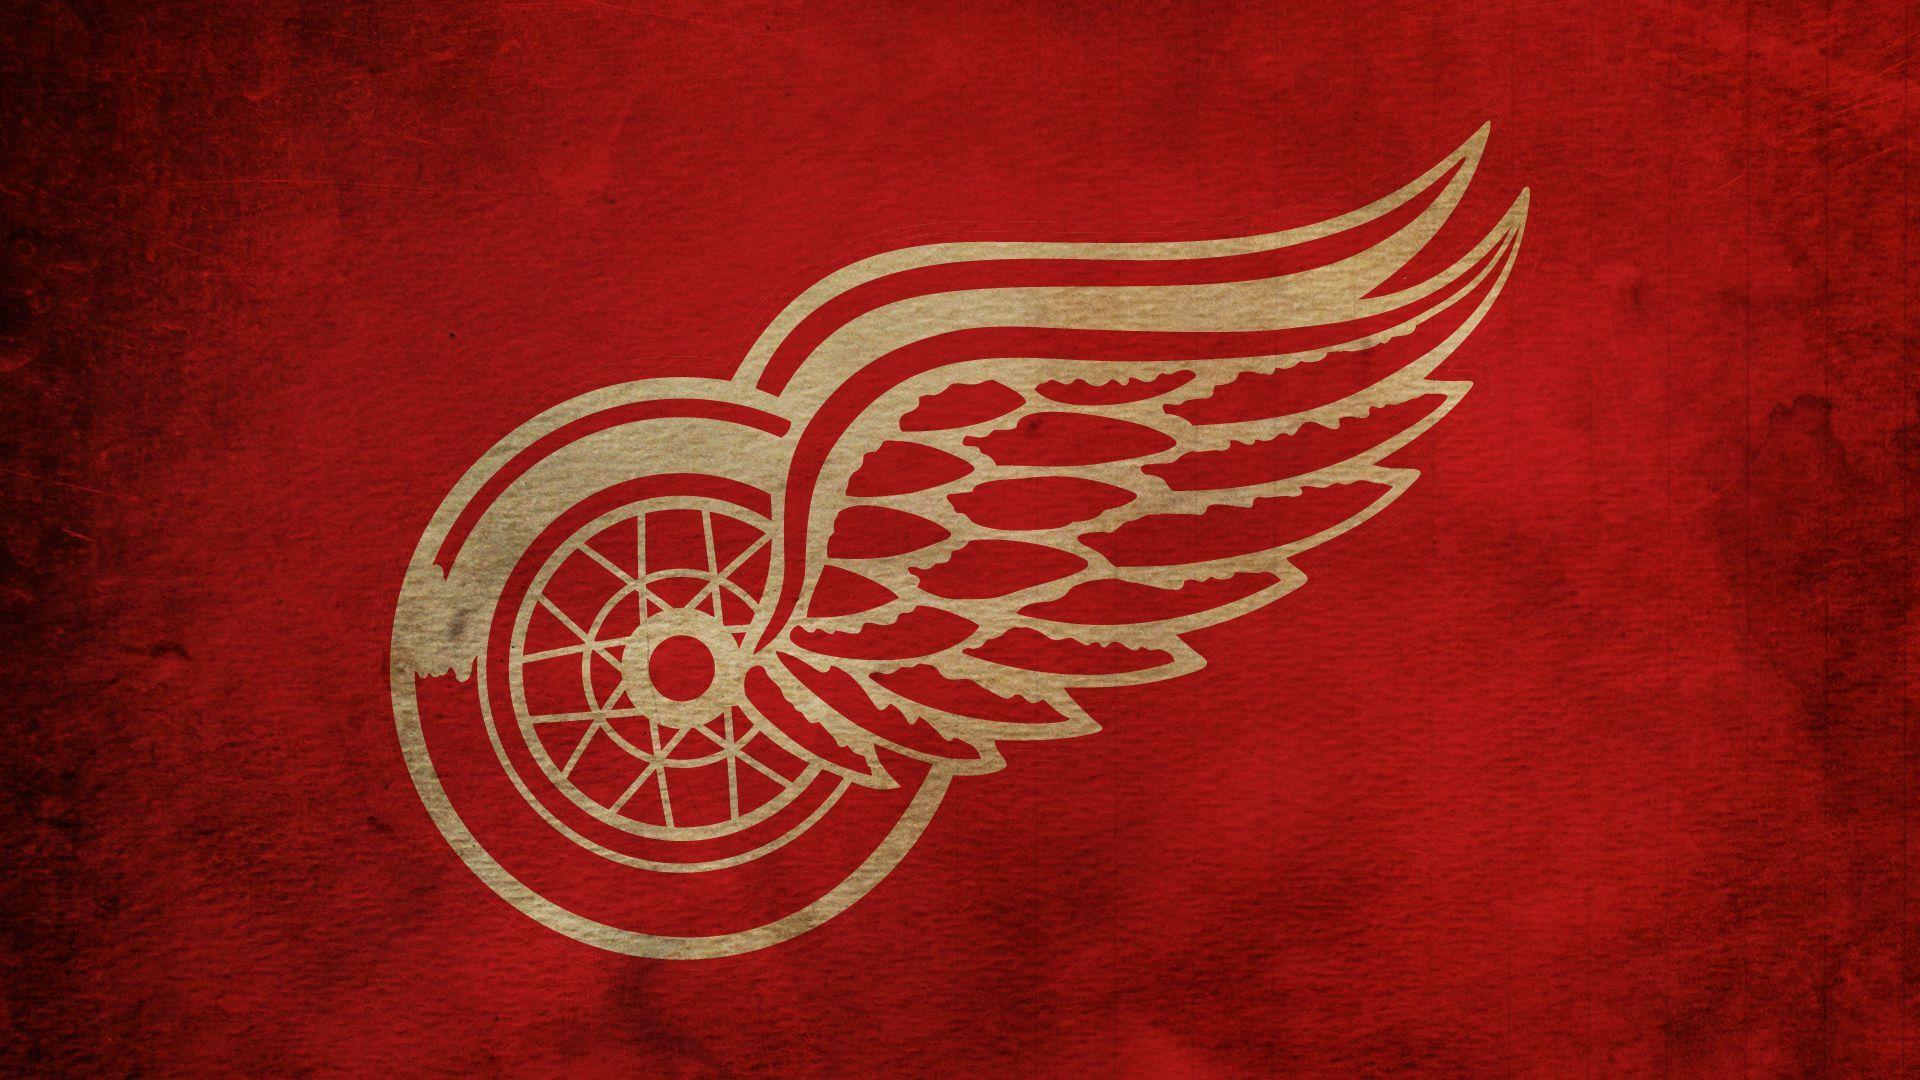 Classic Detroit Red Wings Logo - Pin by Kathy Sirvio on Detroit | Pinterest | Detroit Red Wings ...